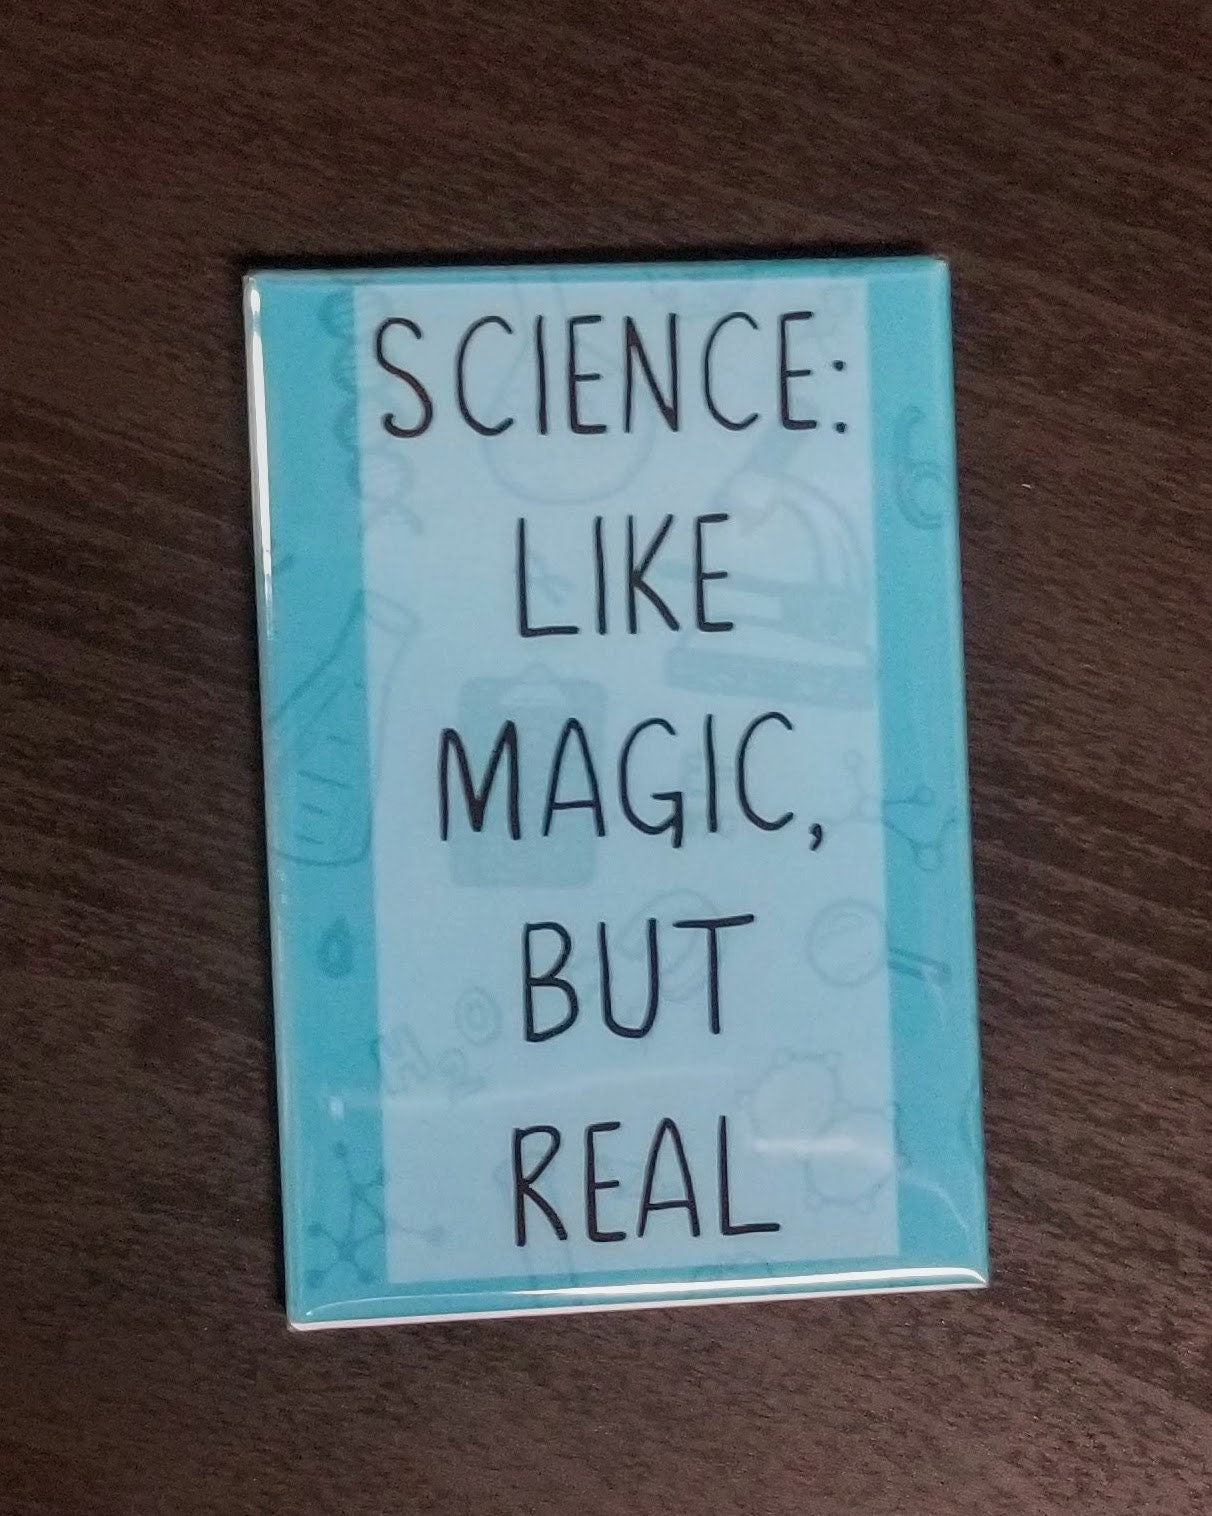 Science: like magic but real quote refrigerator magnet